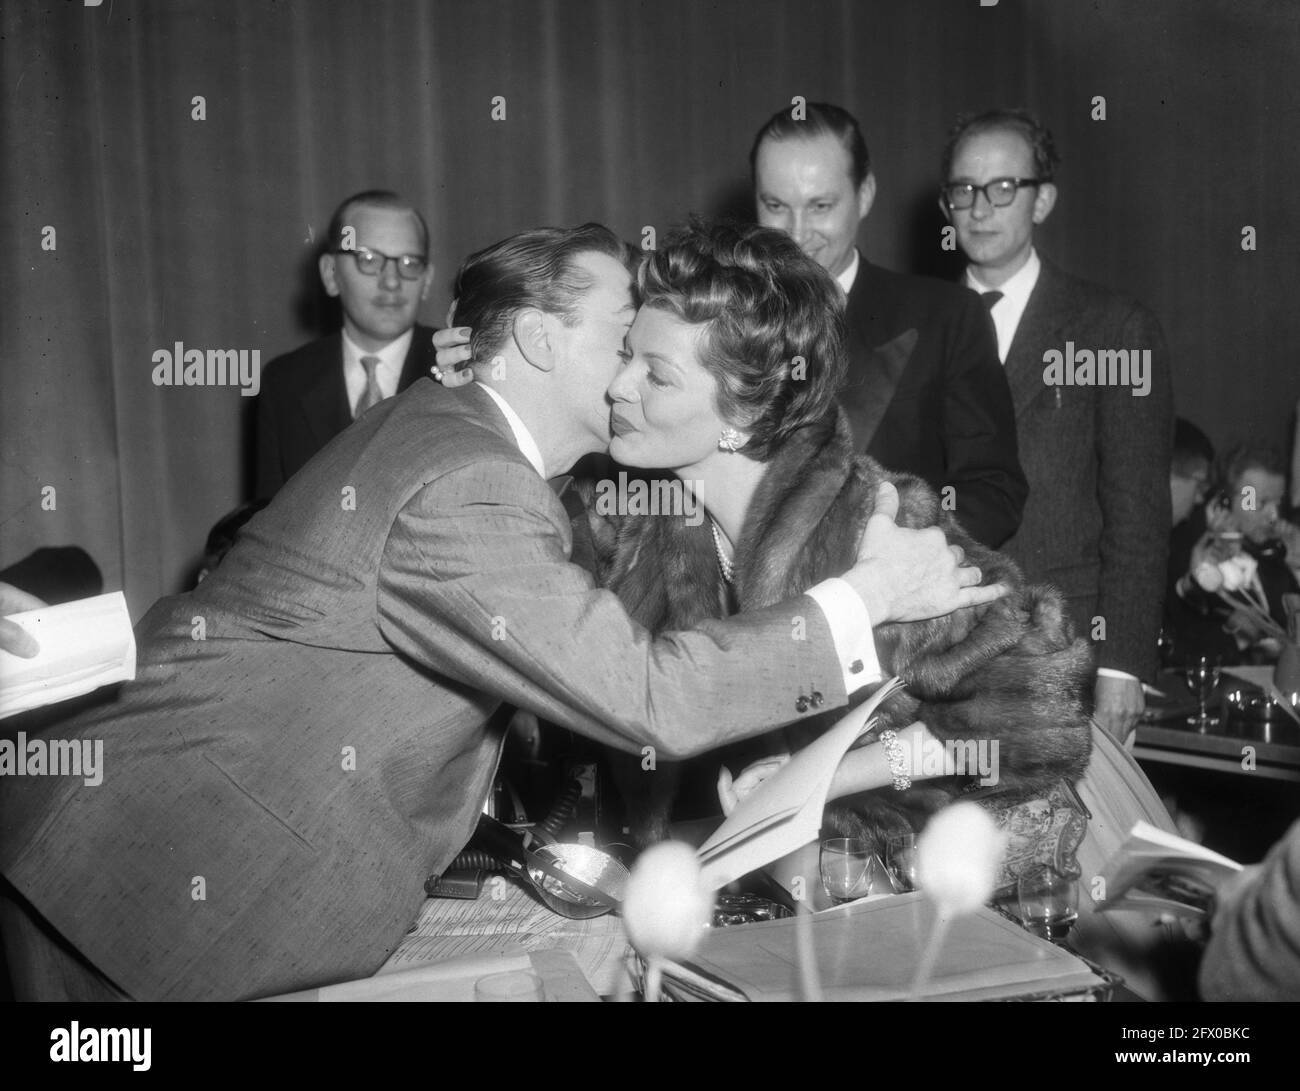 Andre Claveau and Lys Assia, March 11, 1958, The Netherlands, 20th century press agency photo, news to remember, documentary, historic photography 1945-1990, visual stories, human history of the Twentieth Century, capturing moments in time Stock Photo